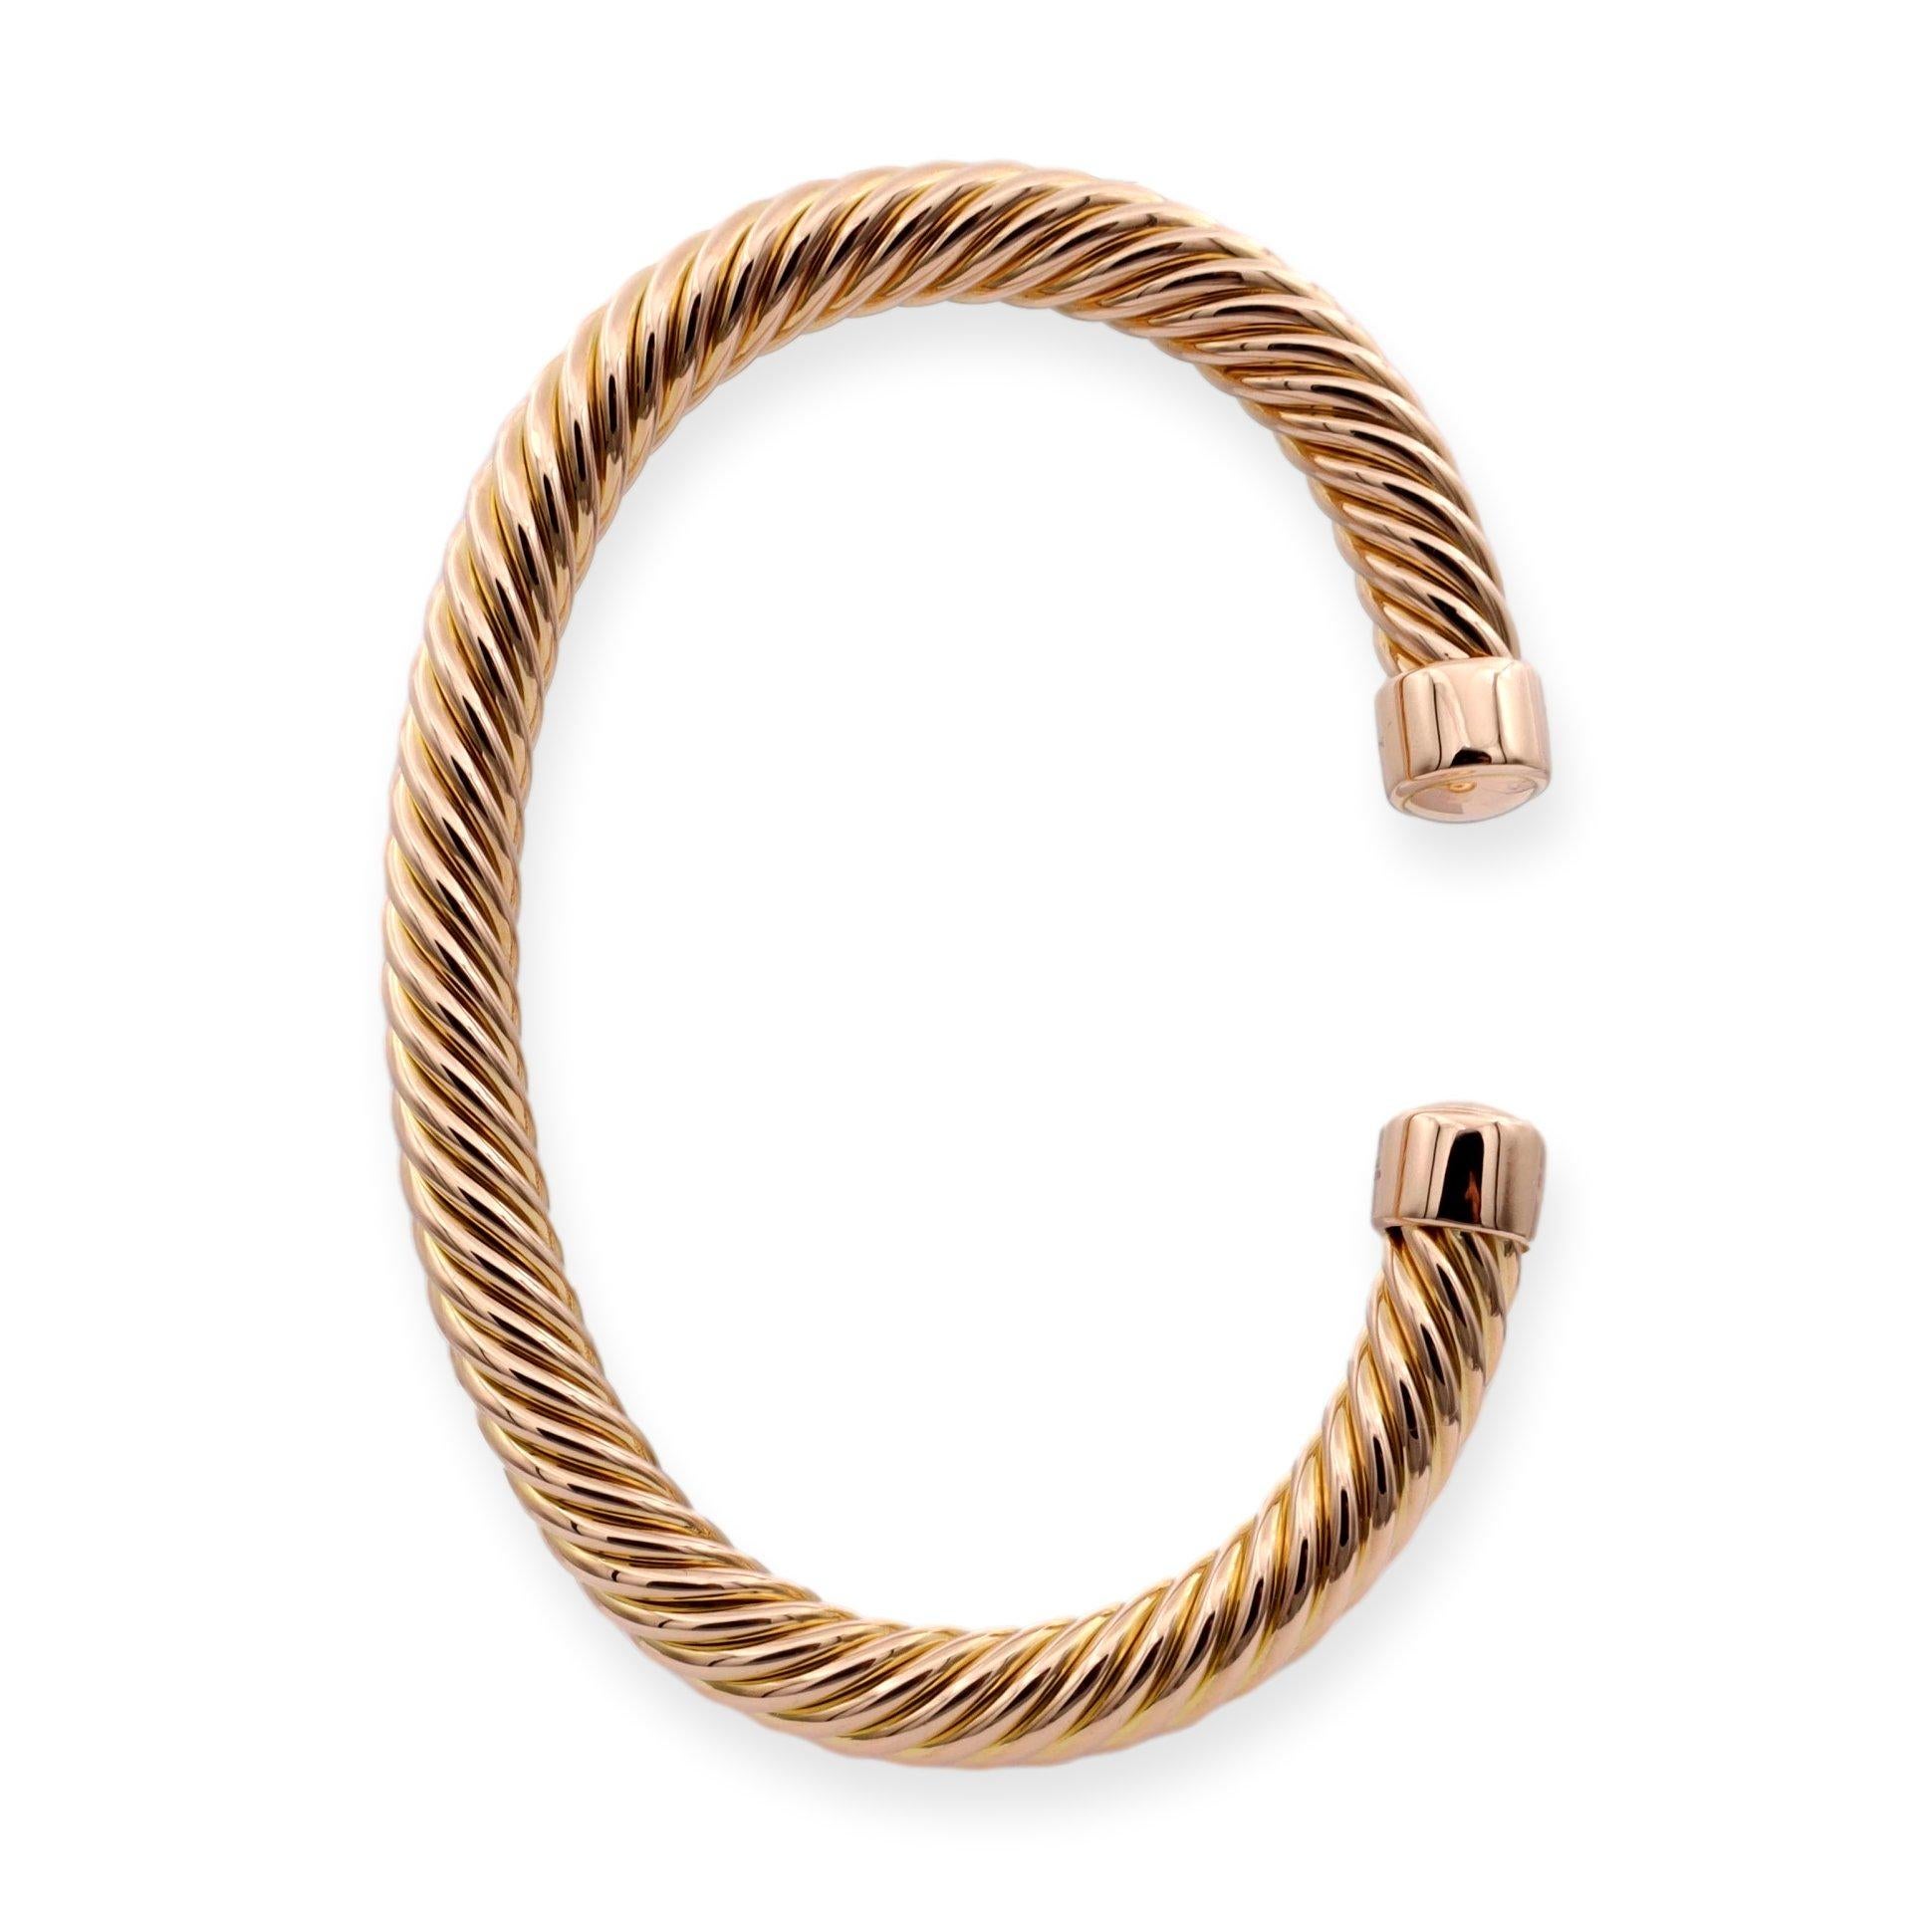 David Yurman open cuff bangle bracelet from the Men's cable collection finely crafted in 18 karat rose gold in a Medium size measuring 7 mm wide. Bracelet has a twisted cable design. Fully hallmarked with designer logo and metal content.

Bracelet